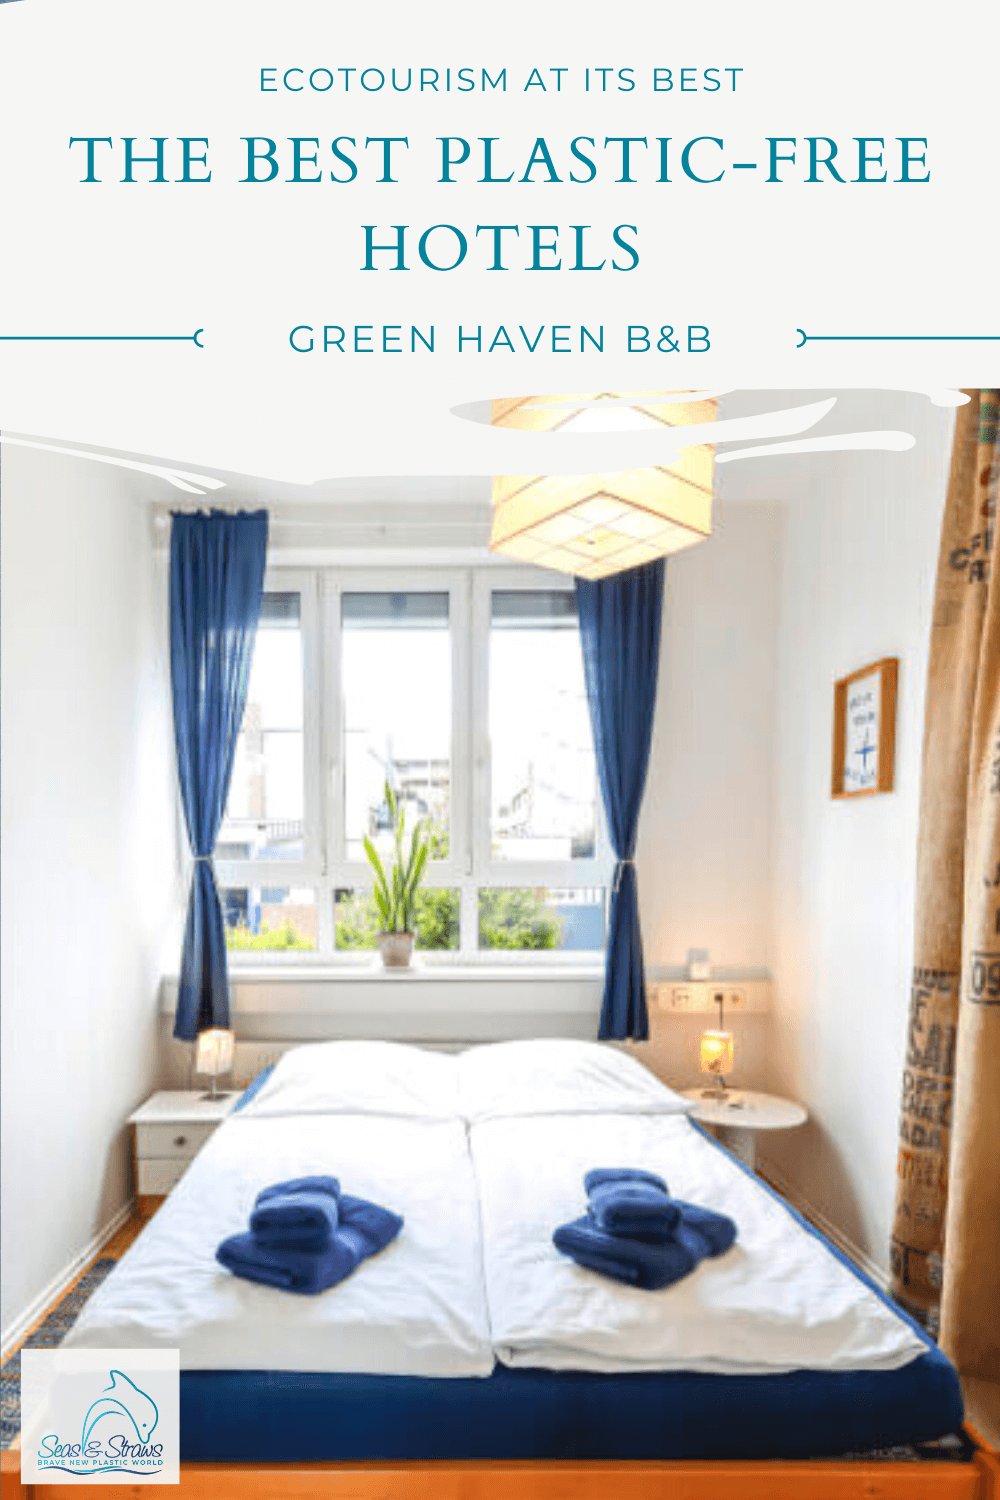 The Green Haven in Hamburg is not only vegan but puts great emphasis on being sustainable and plastic-free.